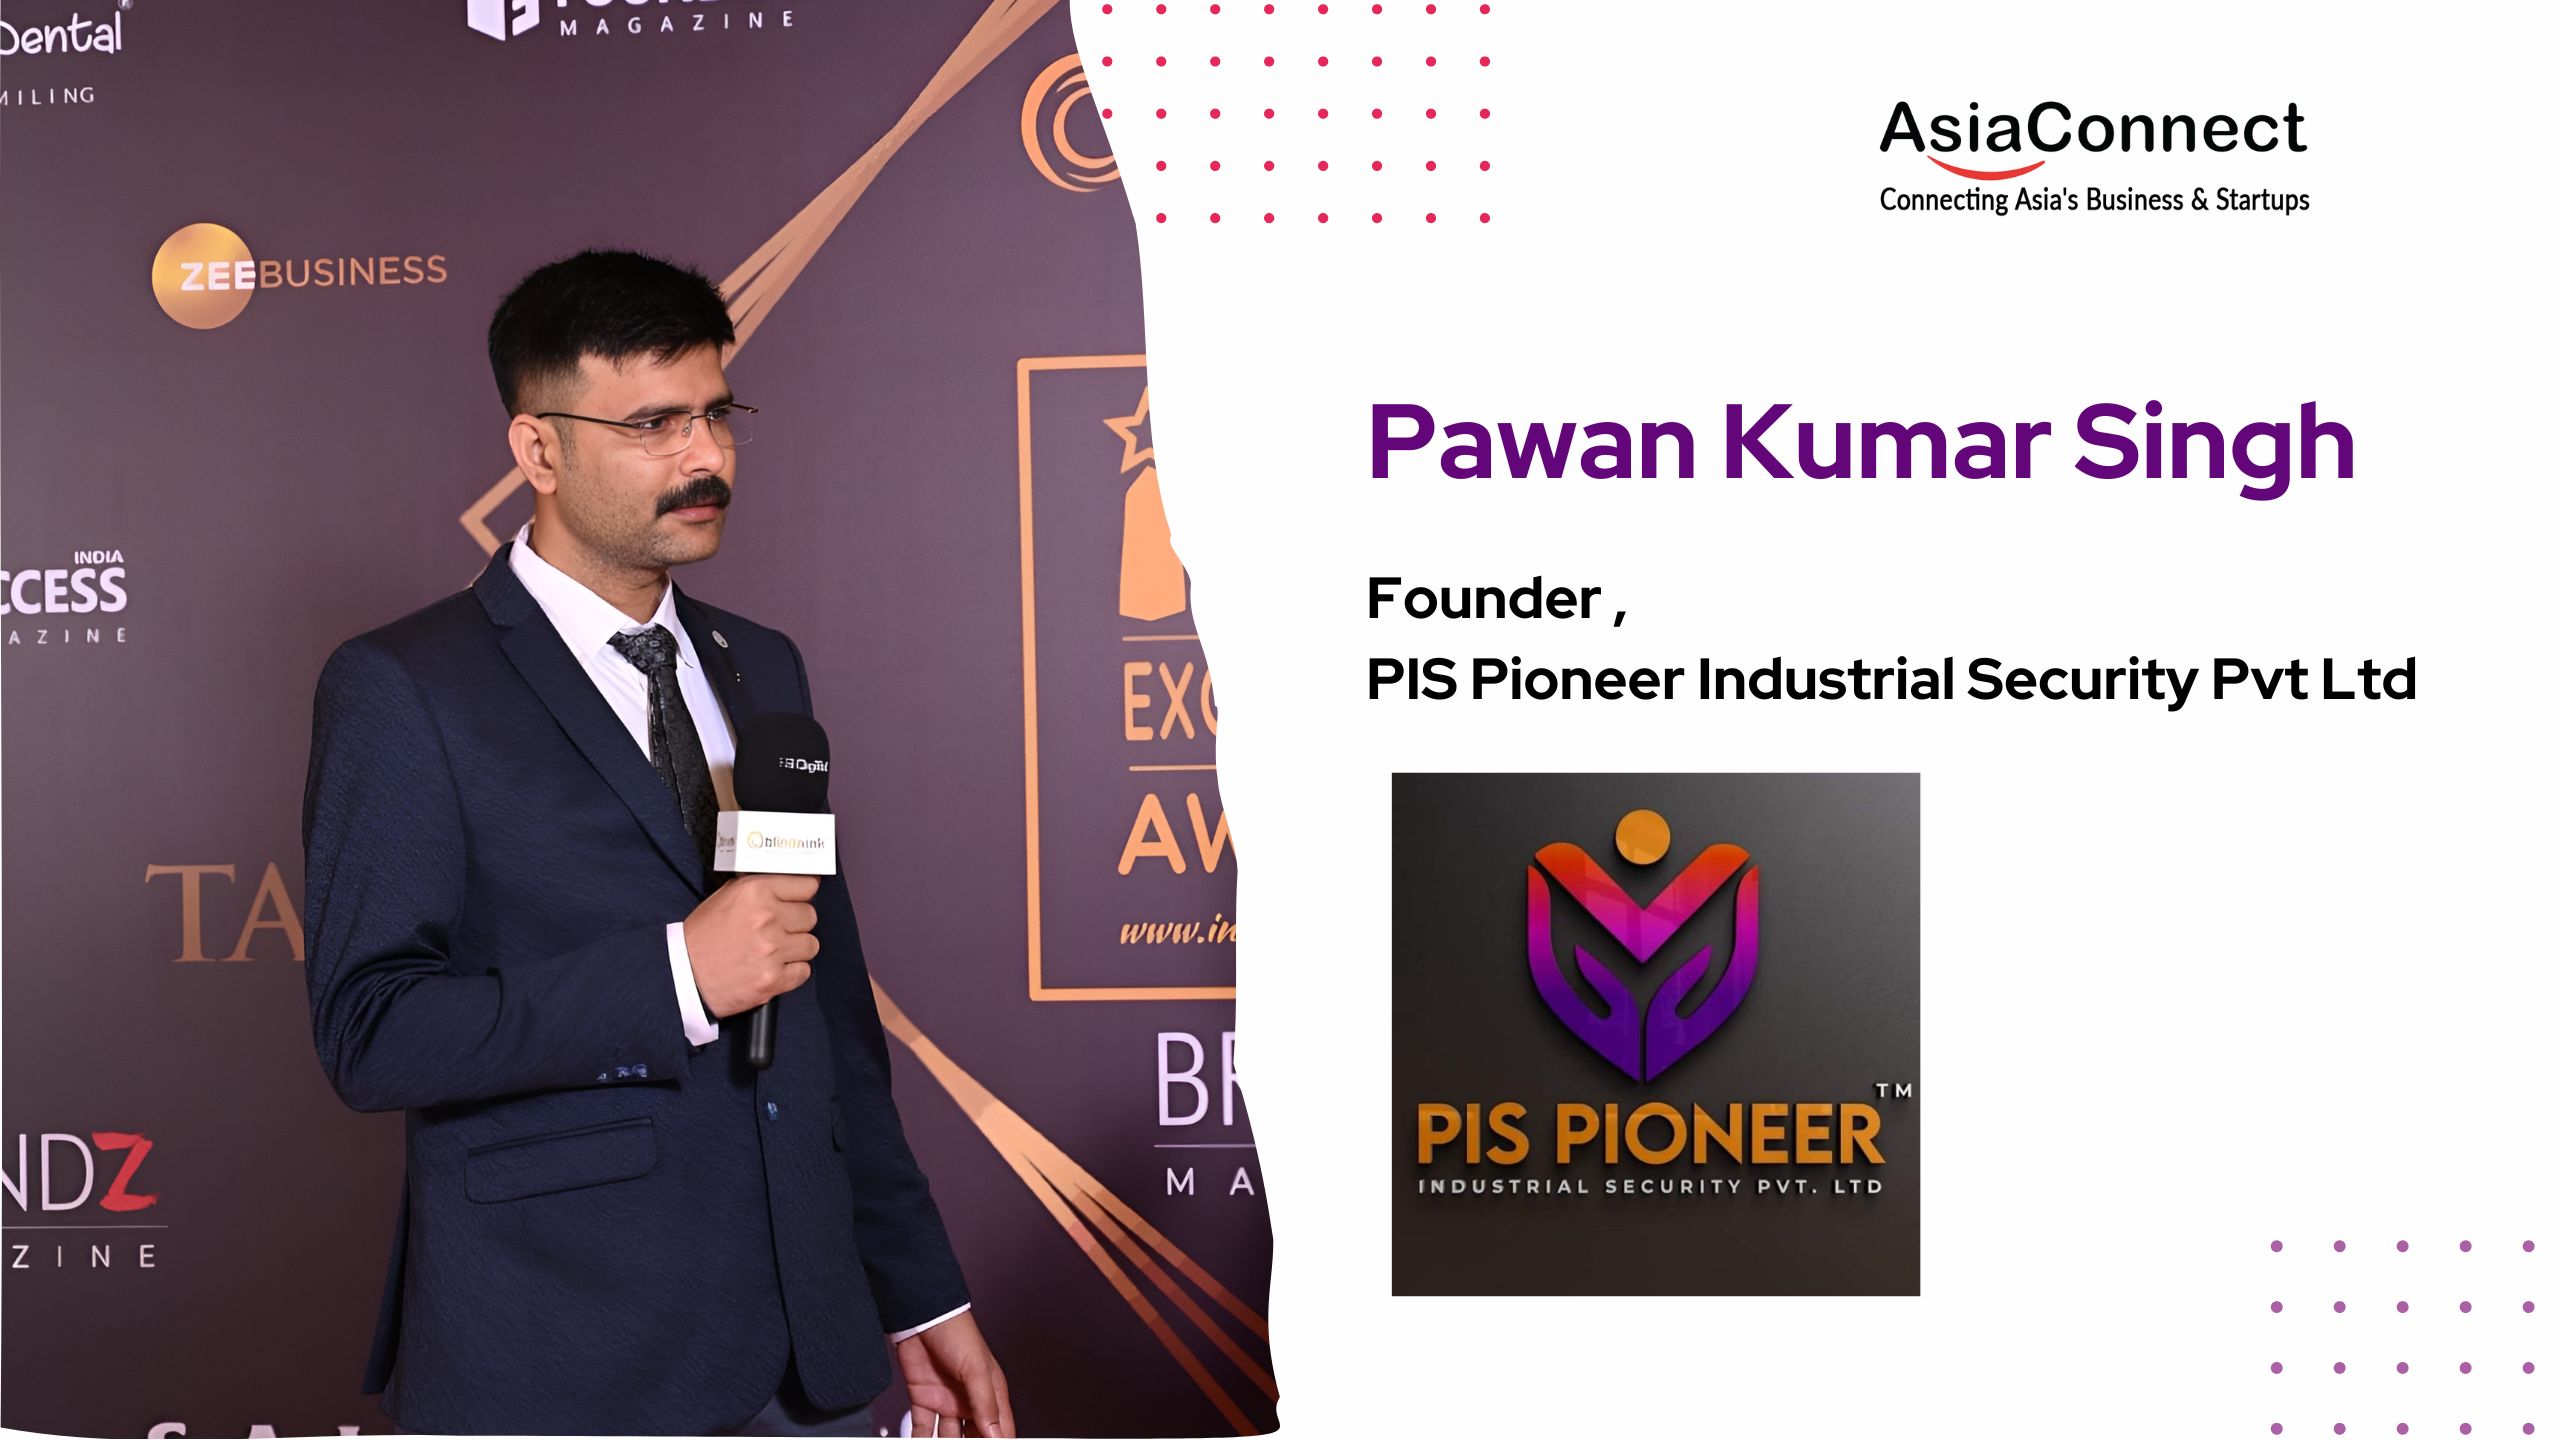 From Volunteer to Visionary: The Inspiring Journey of Pawan Kumar Singh and Pis Pioneer Industrial Security Pvt. Ltd.